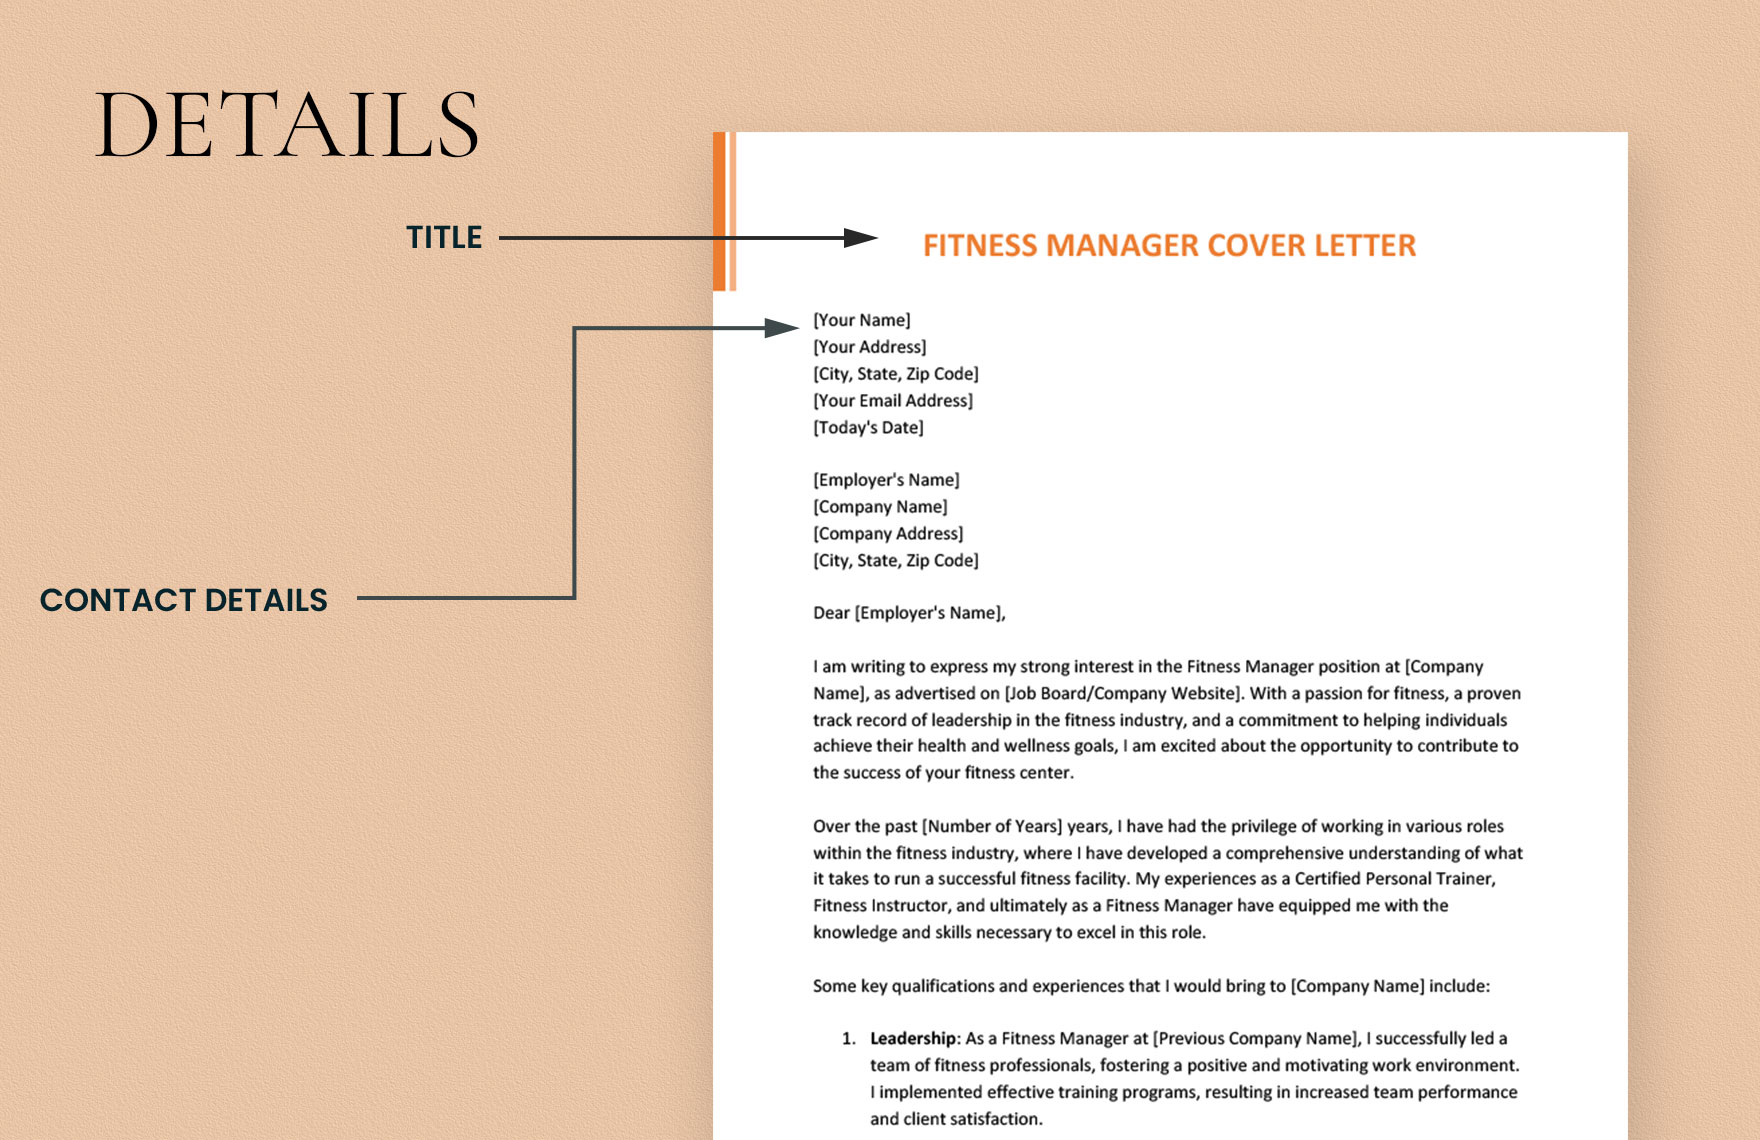 Fitness Manager Cover Letter